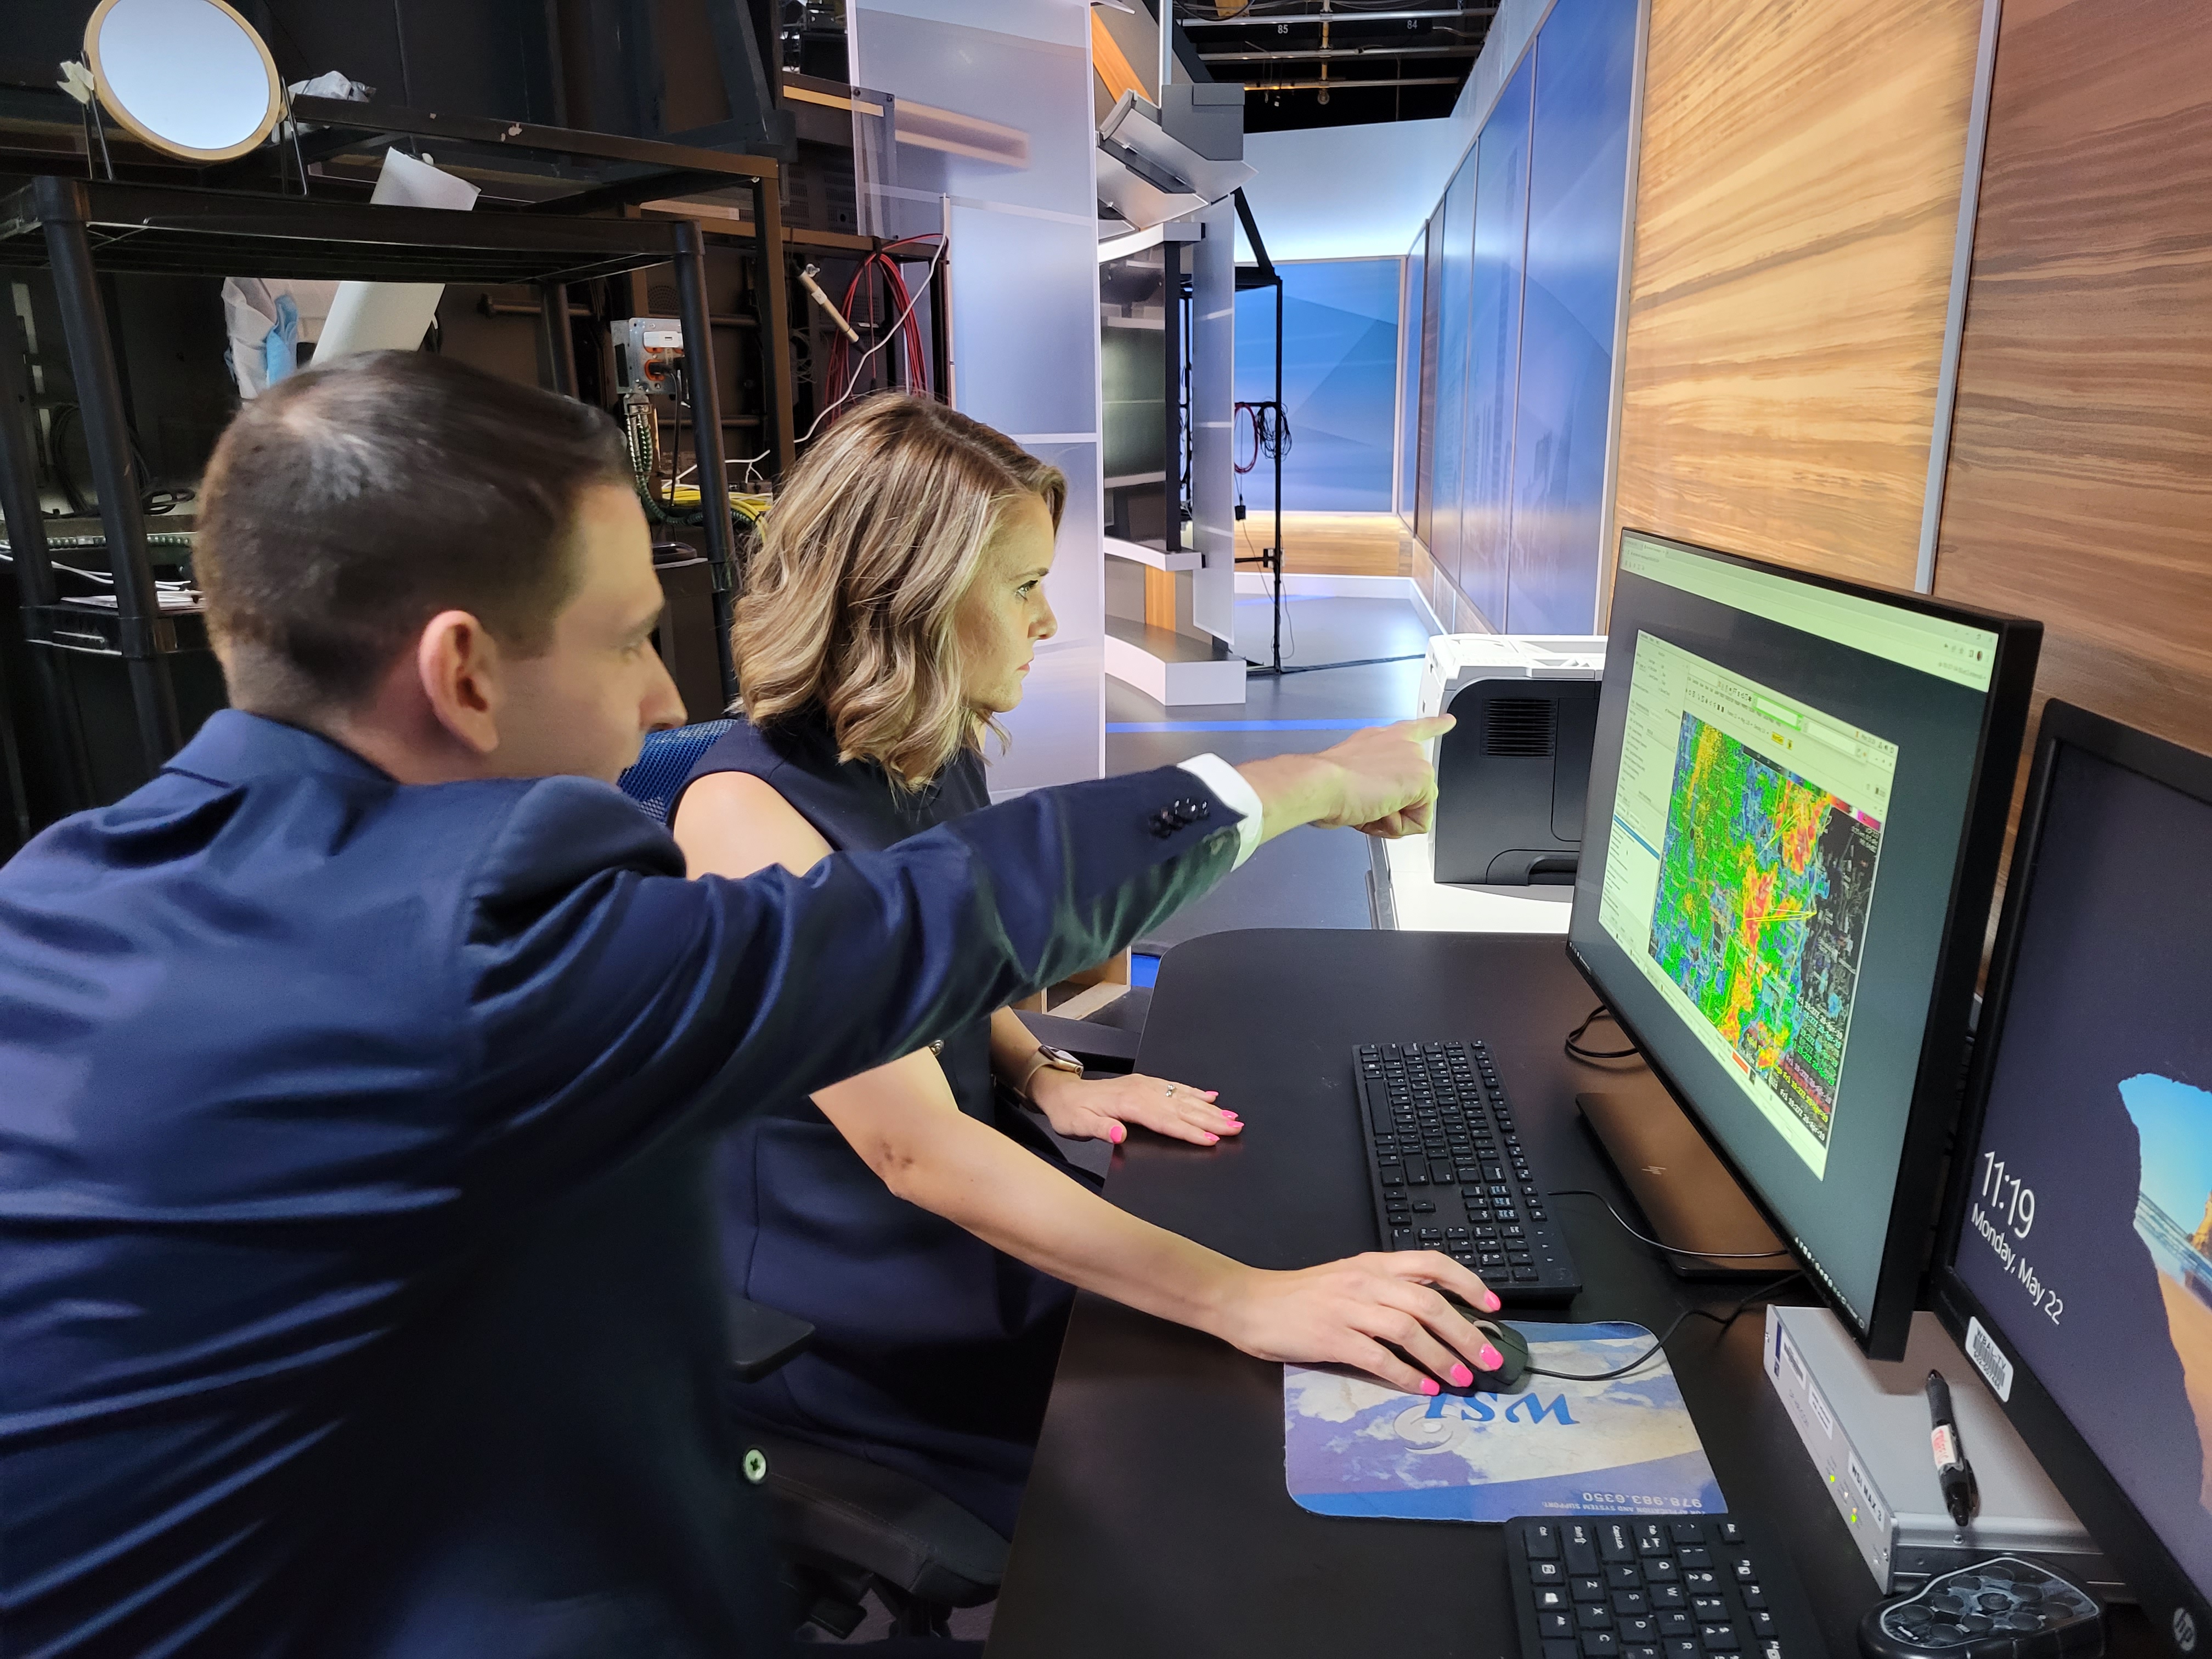 WBAL-TV 11 Morning Meteorologist Ava Marie goes through the process of drawing up a warning using WarnGen for a simulated event that occurred April 26, 2019.